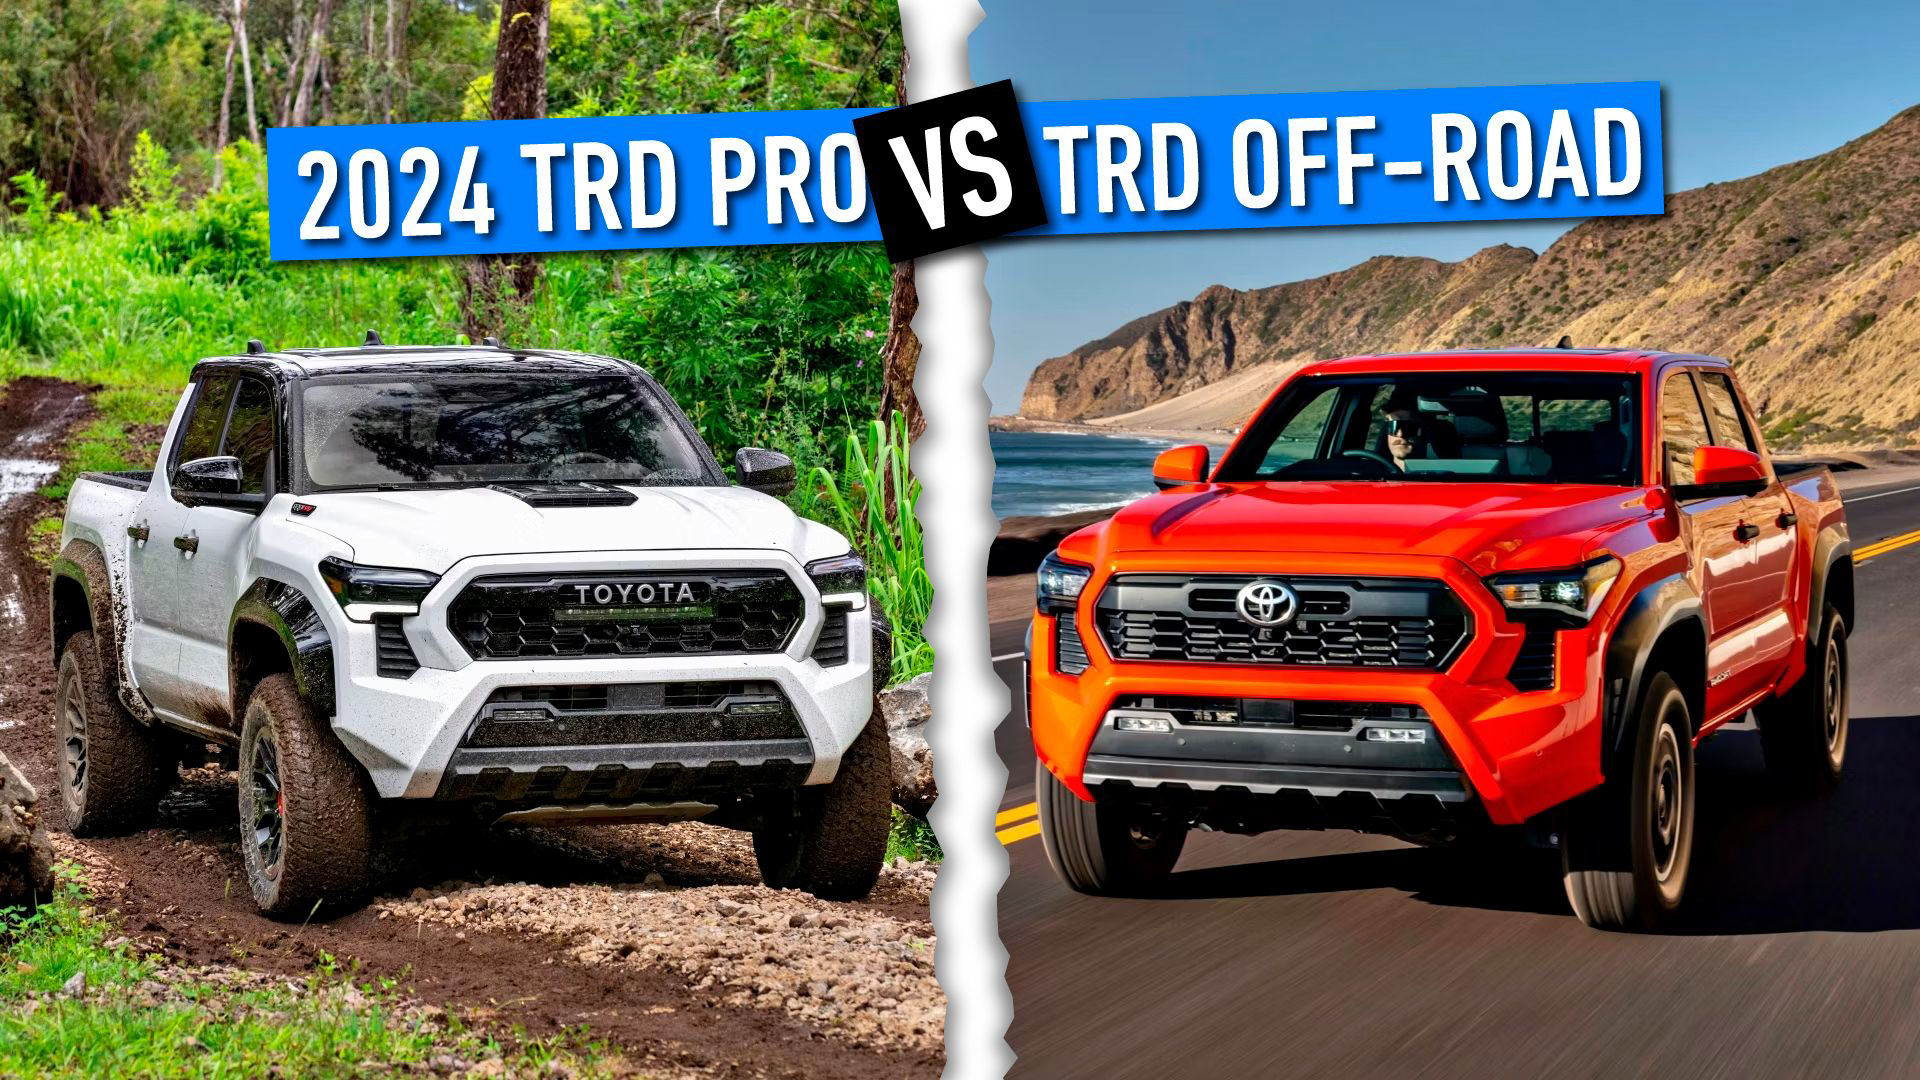 2024 Toyota TRD Pro Vs. TRD OffRoad Key Differences Explained